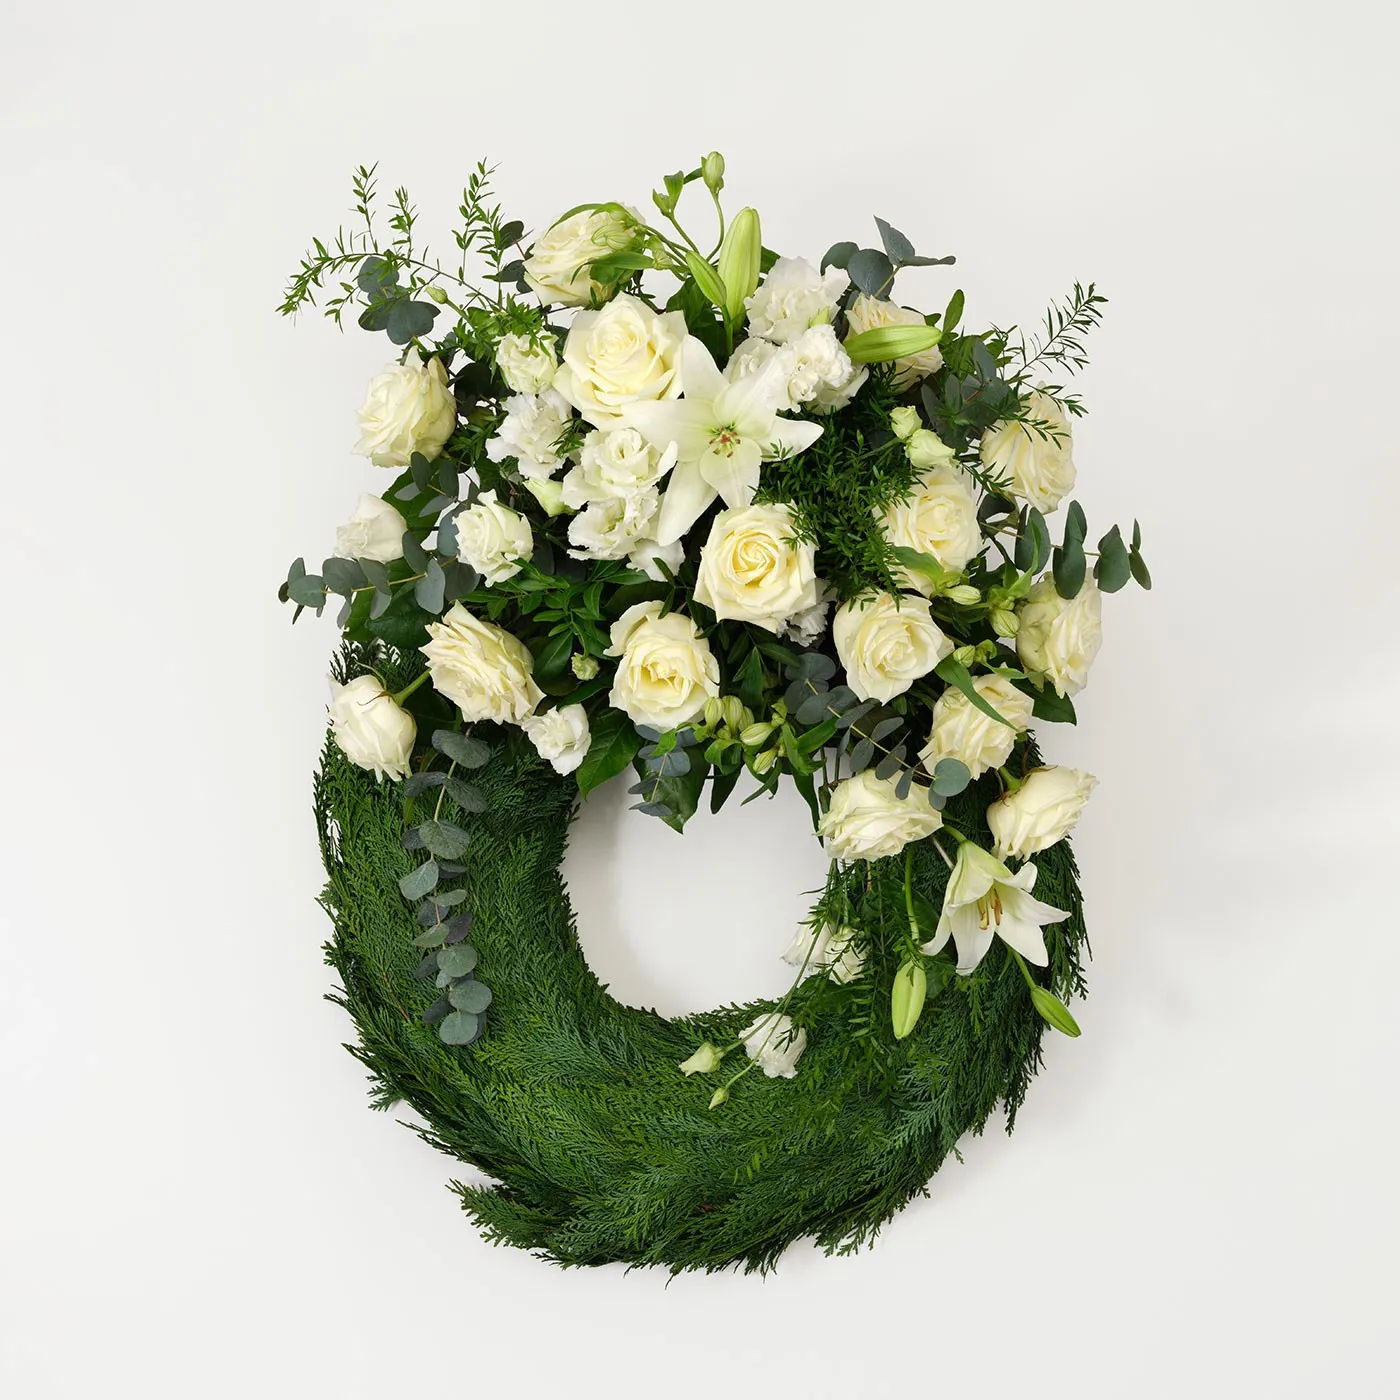 Funeral wreath traditional style - Sweden